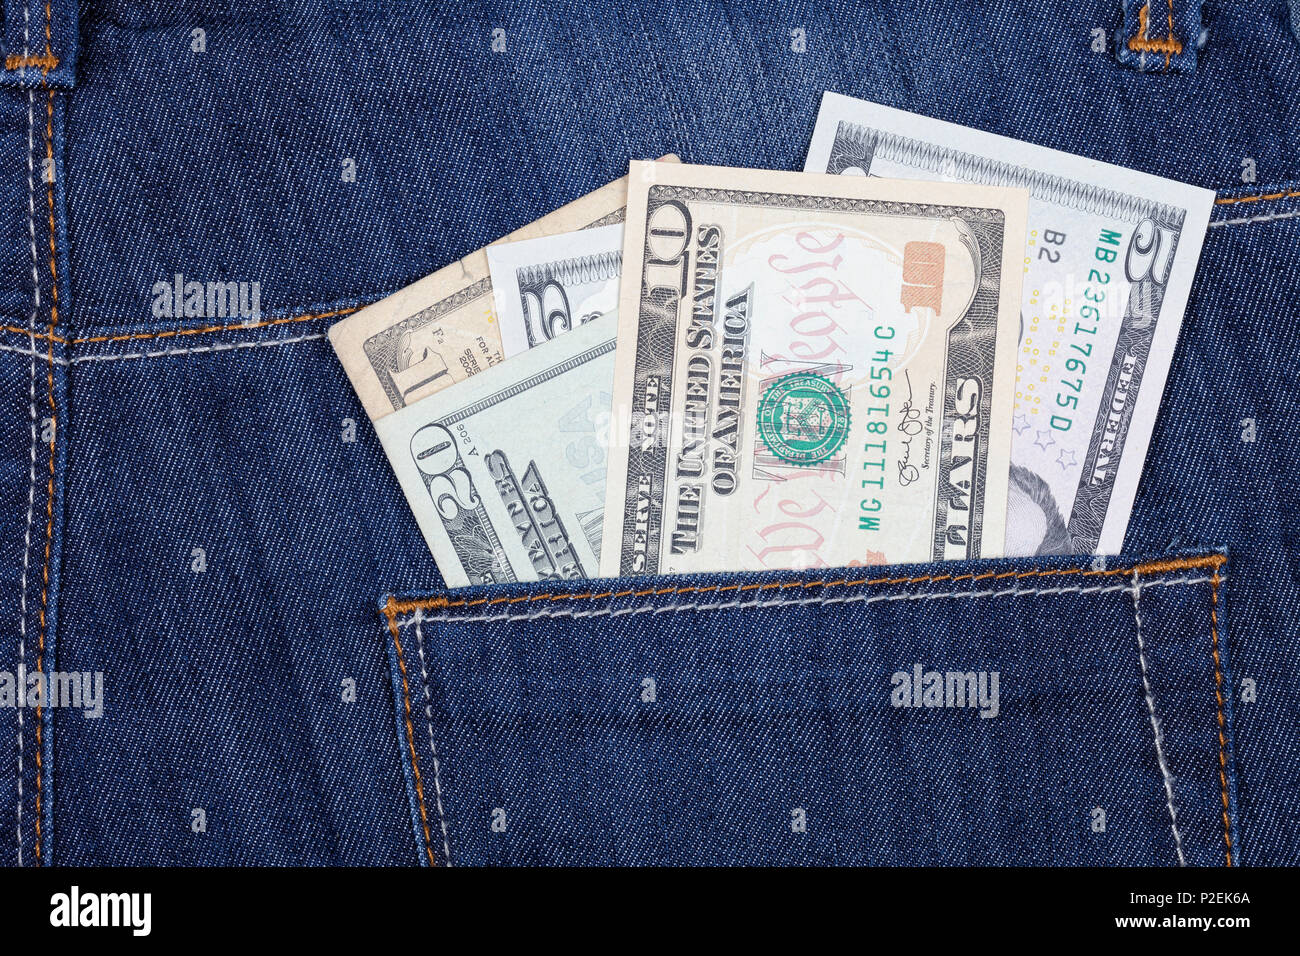 A few US dollar bills sticking out of the back pocket of his trousers. Stock Photo